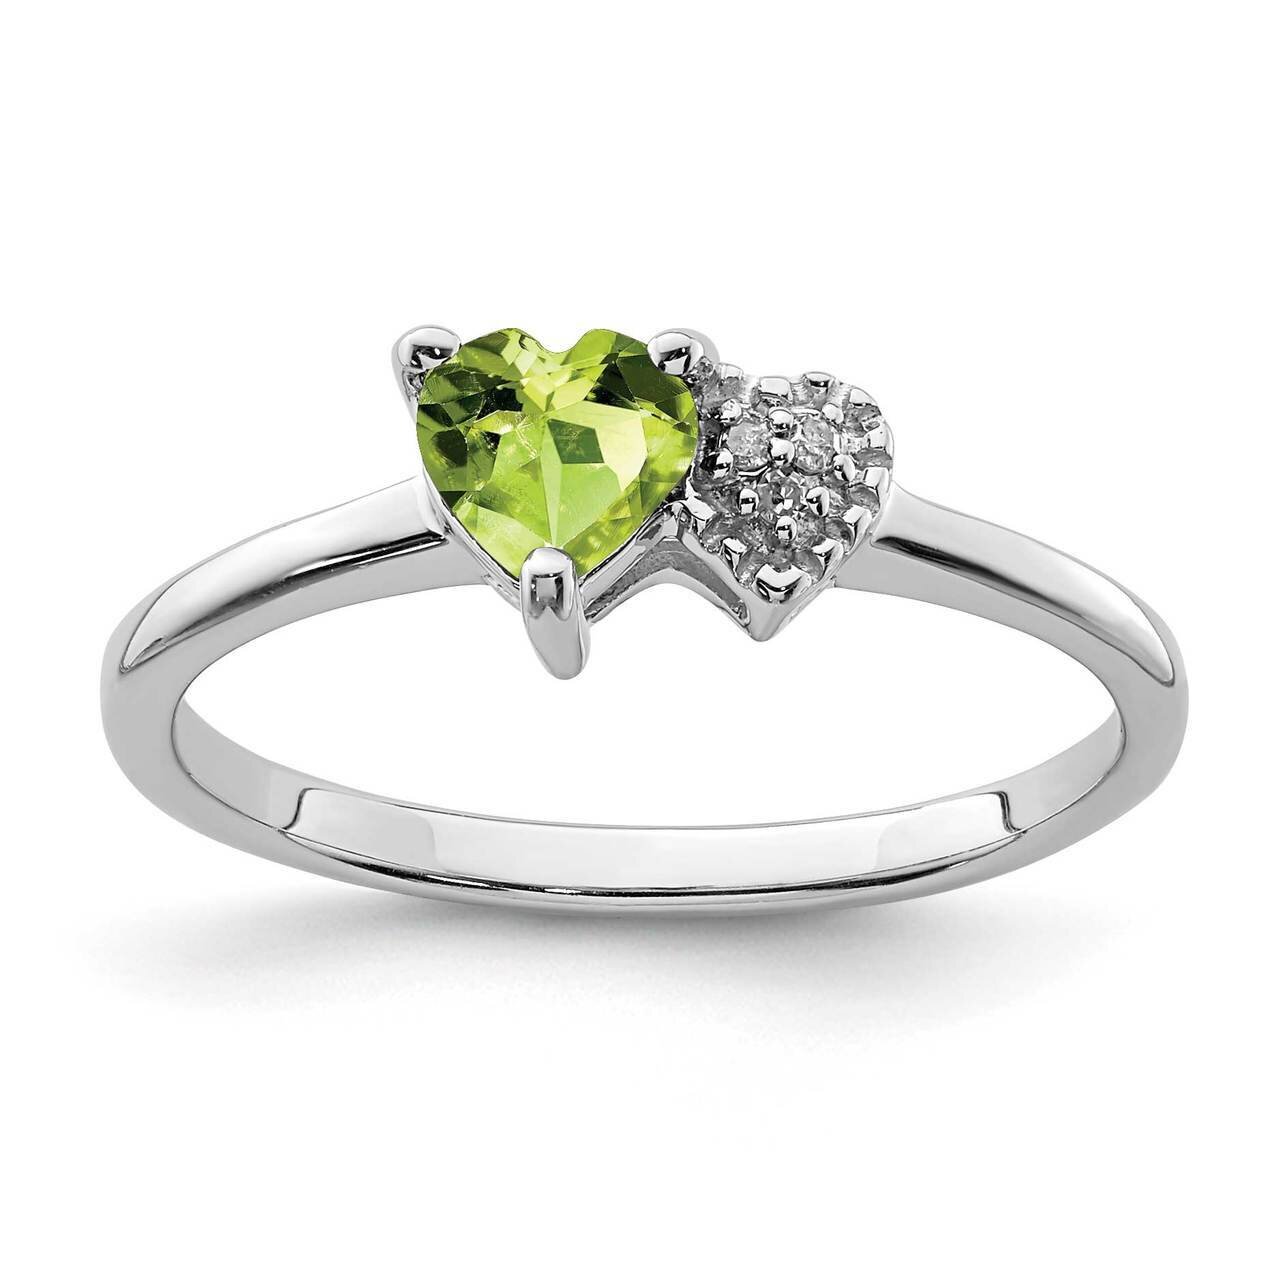 Peridot and Diamond Ring Sterling Silver Polished QR7063AUG